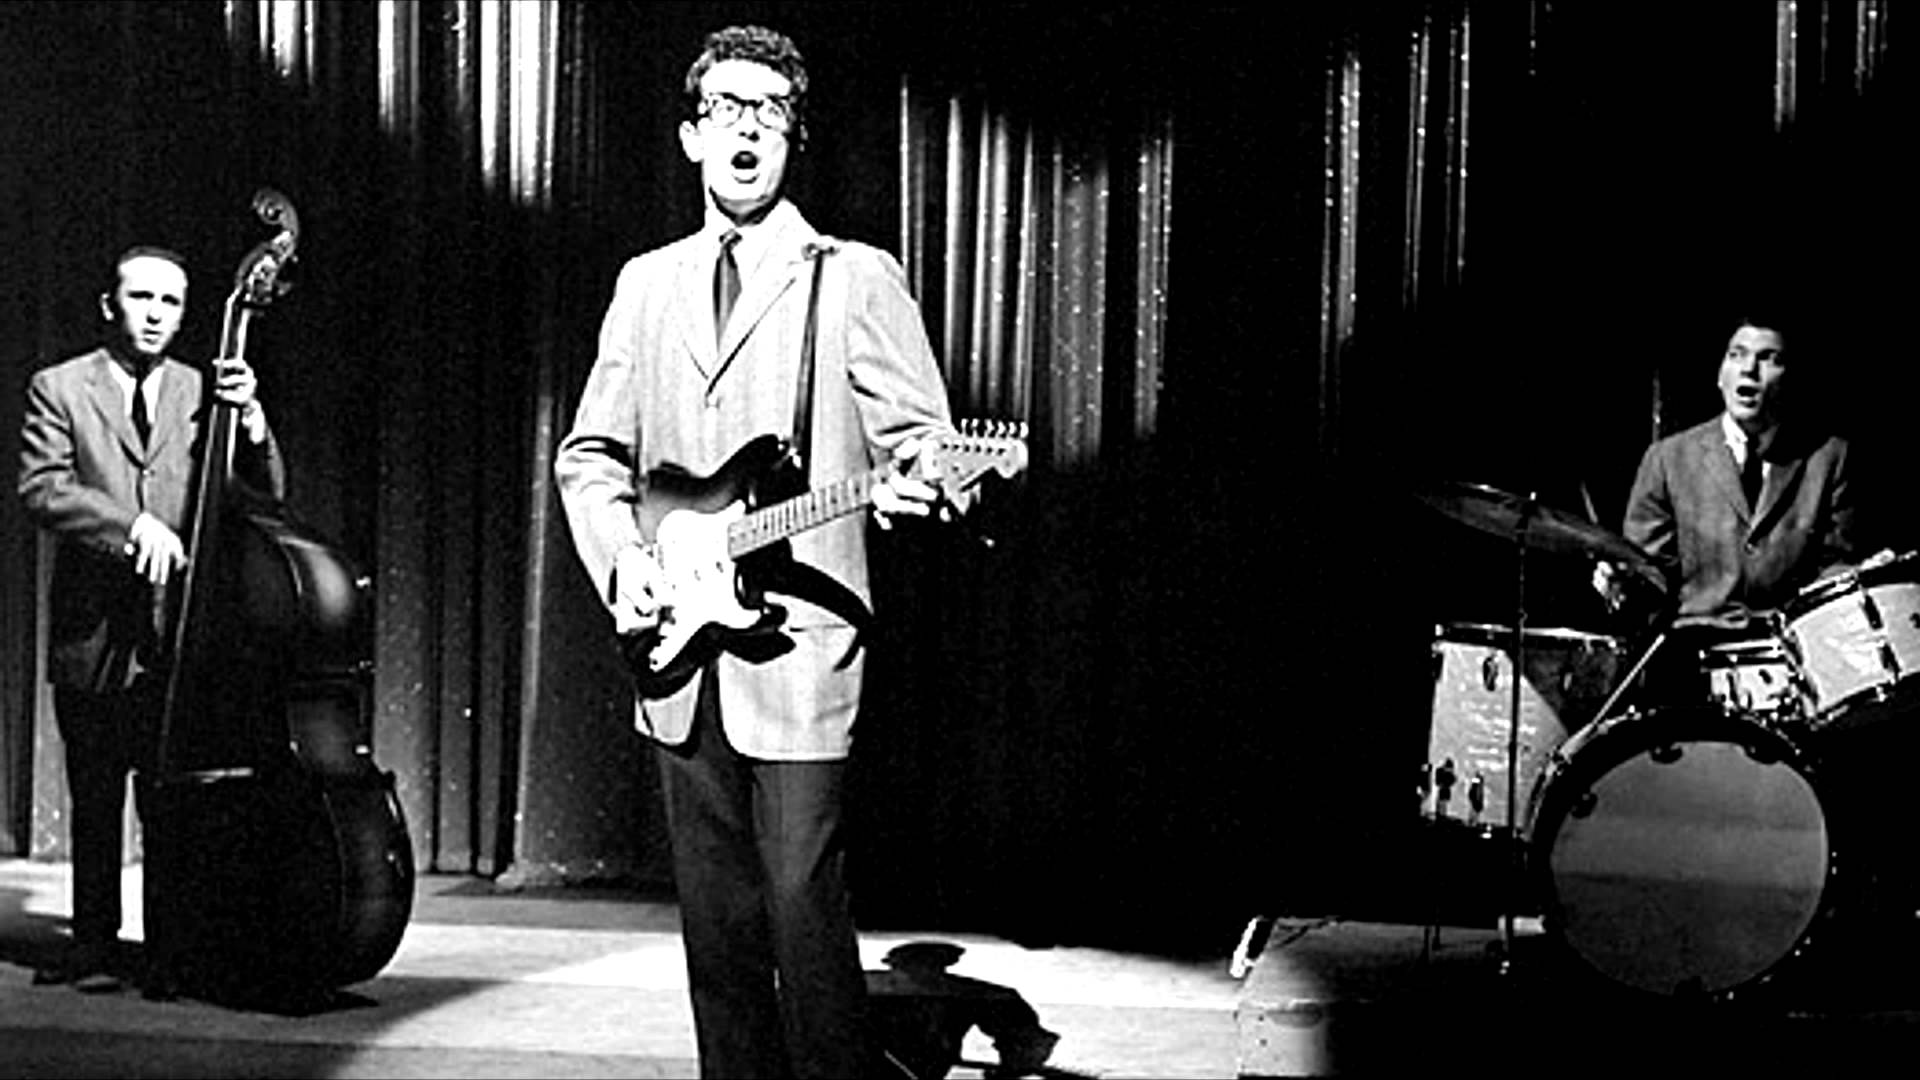 The day buddy holly crickets played portland